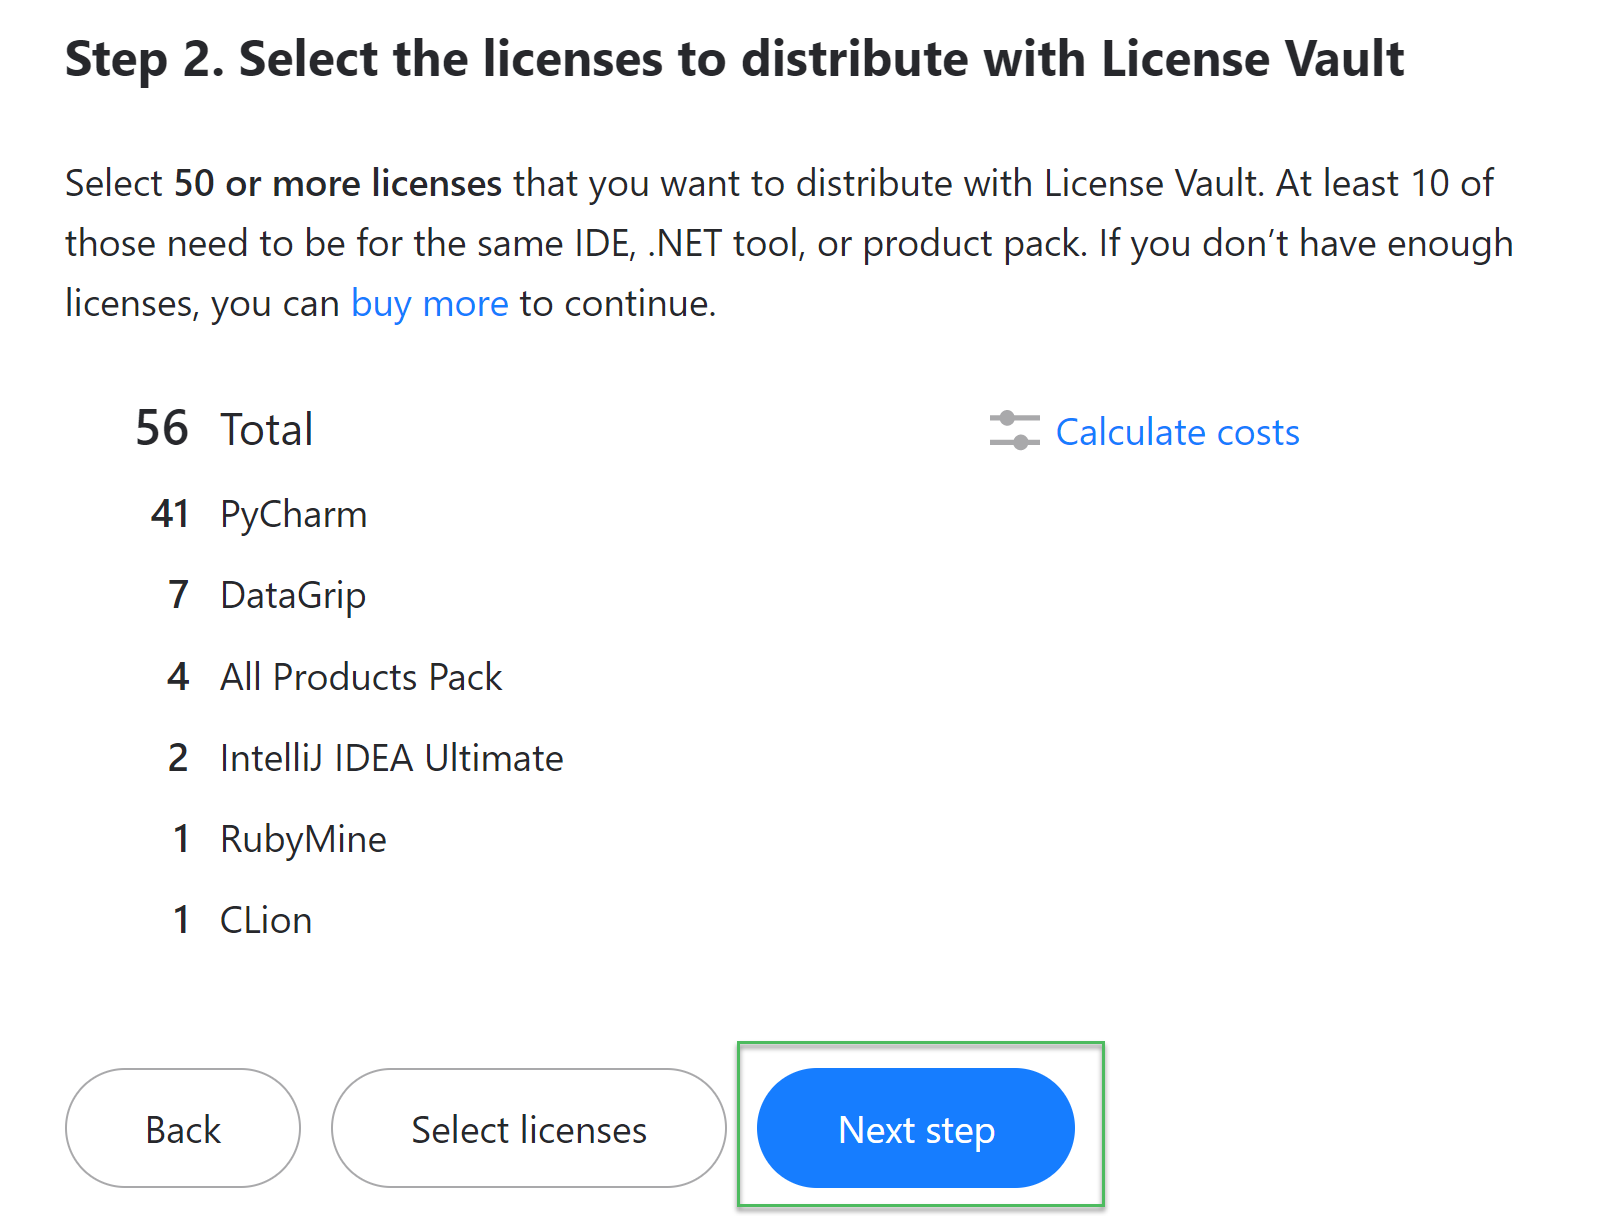 The Next step button on the License Vault upgrade page